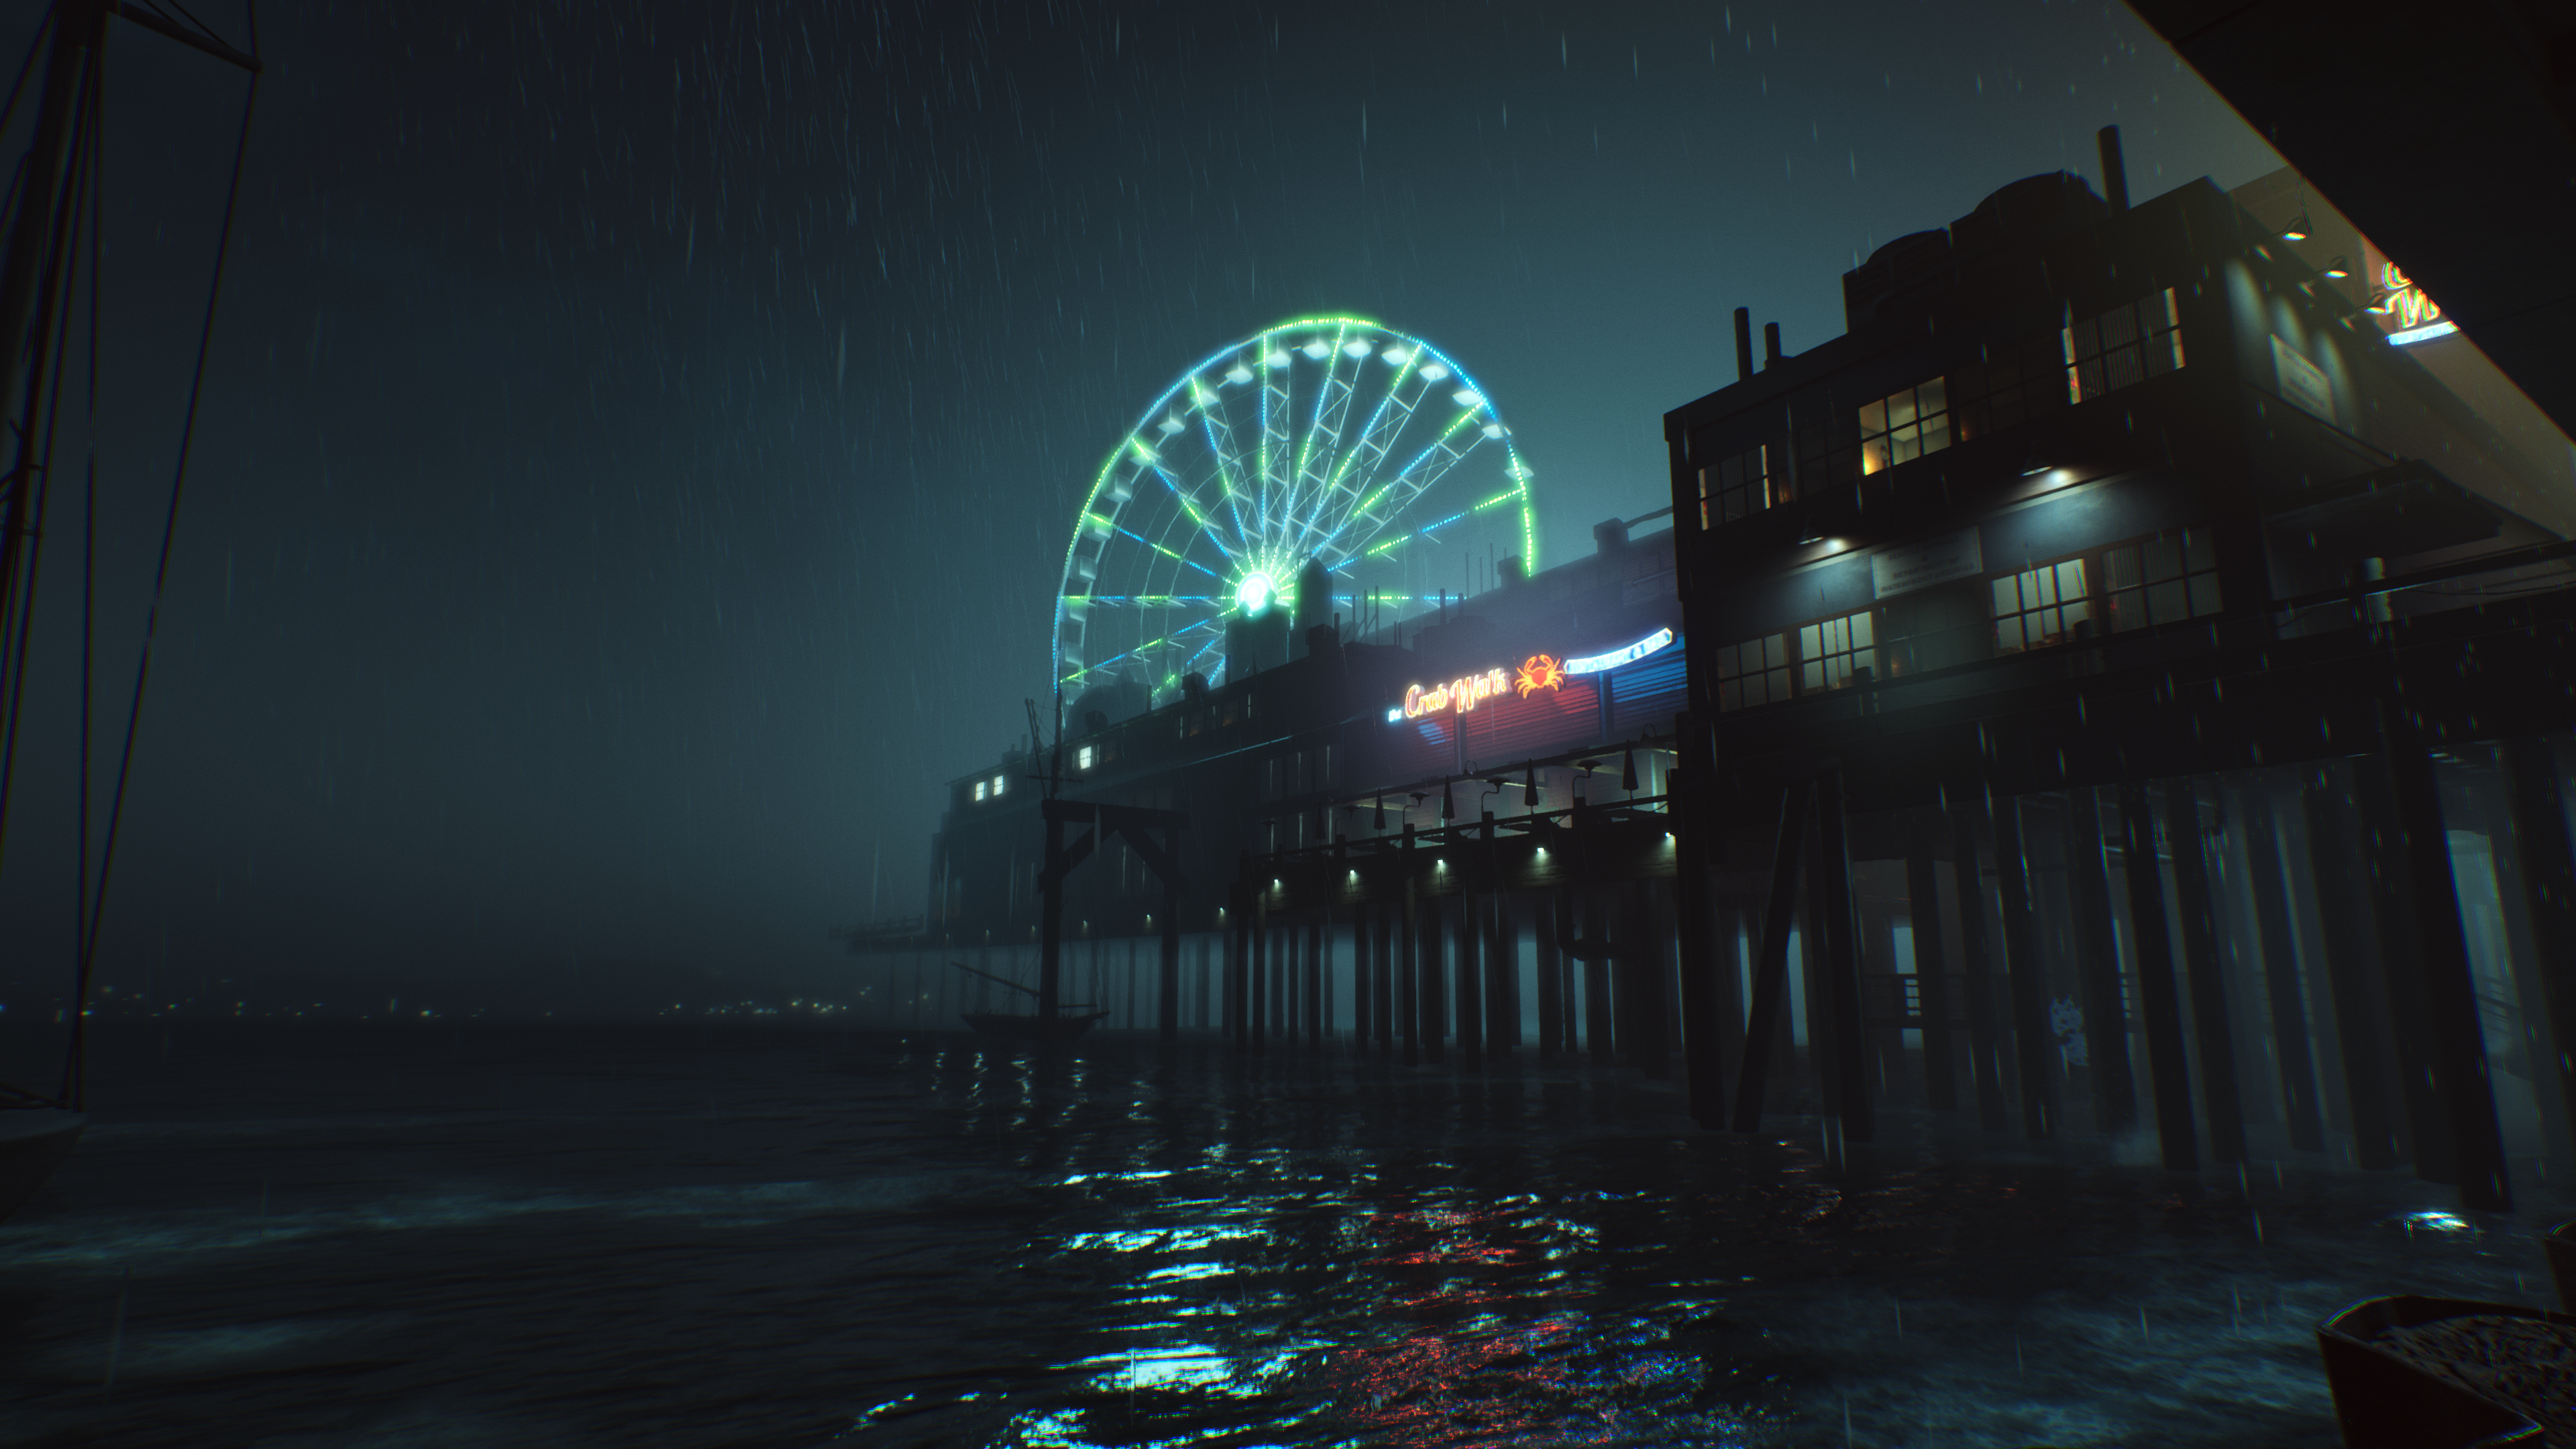 Vampire: The Masquerade—Bloodlines 2: Everything we know